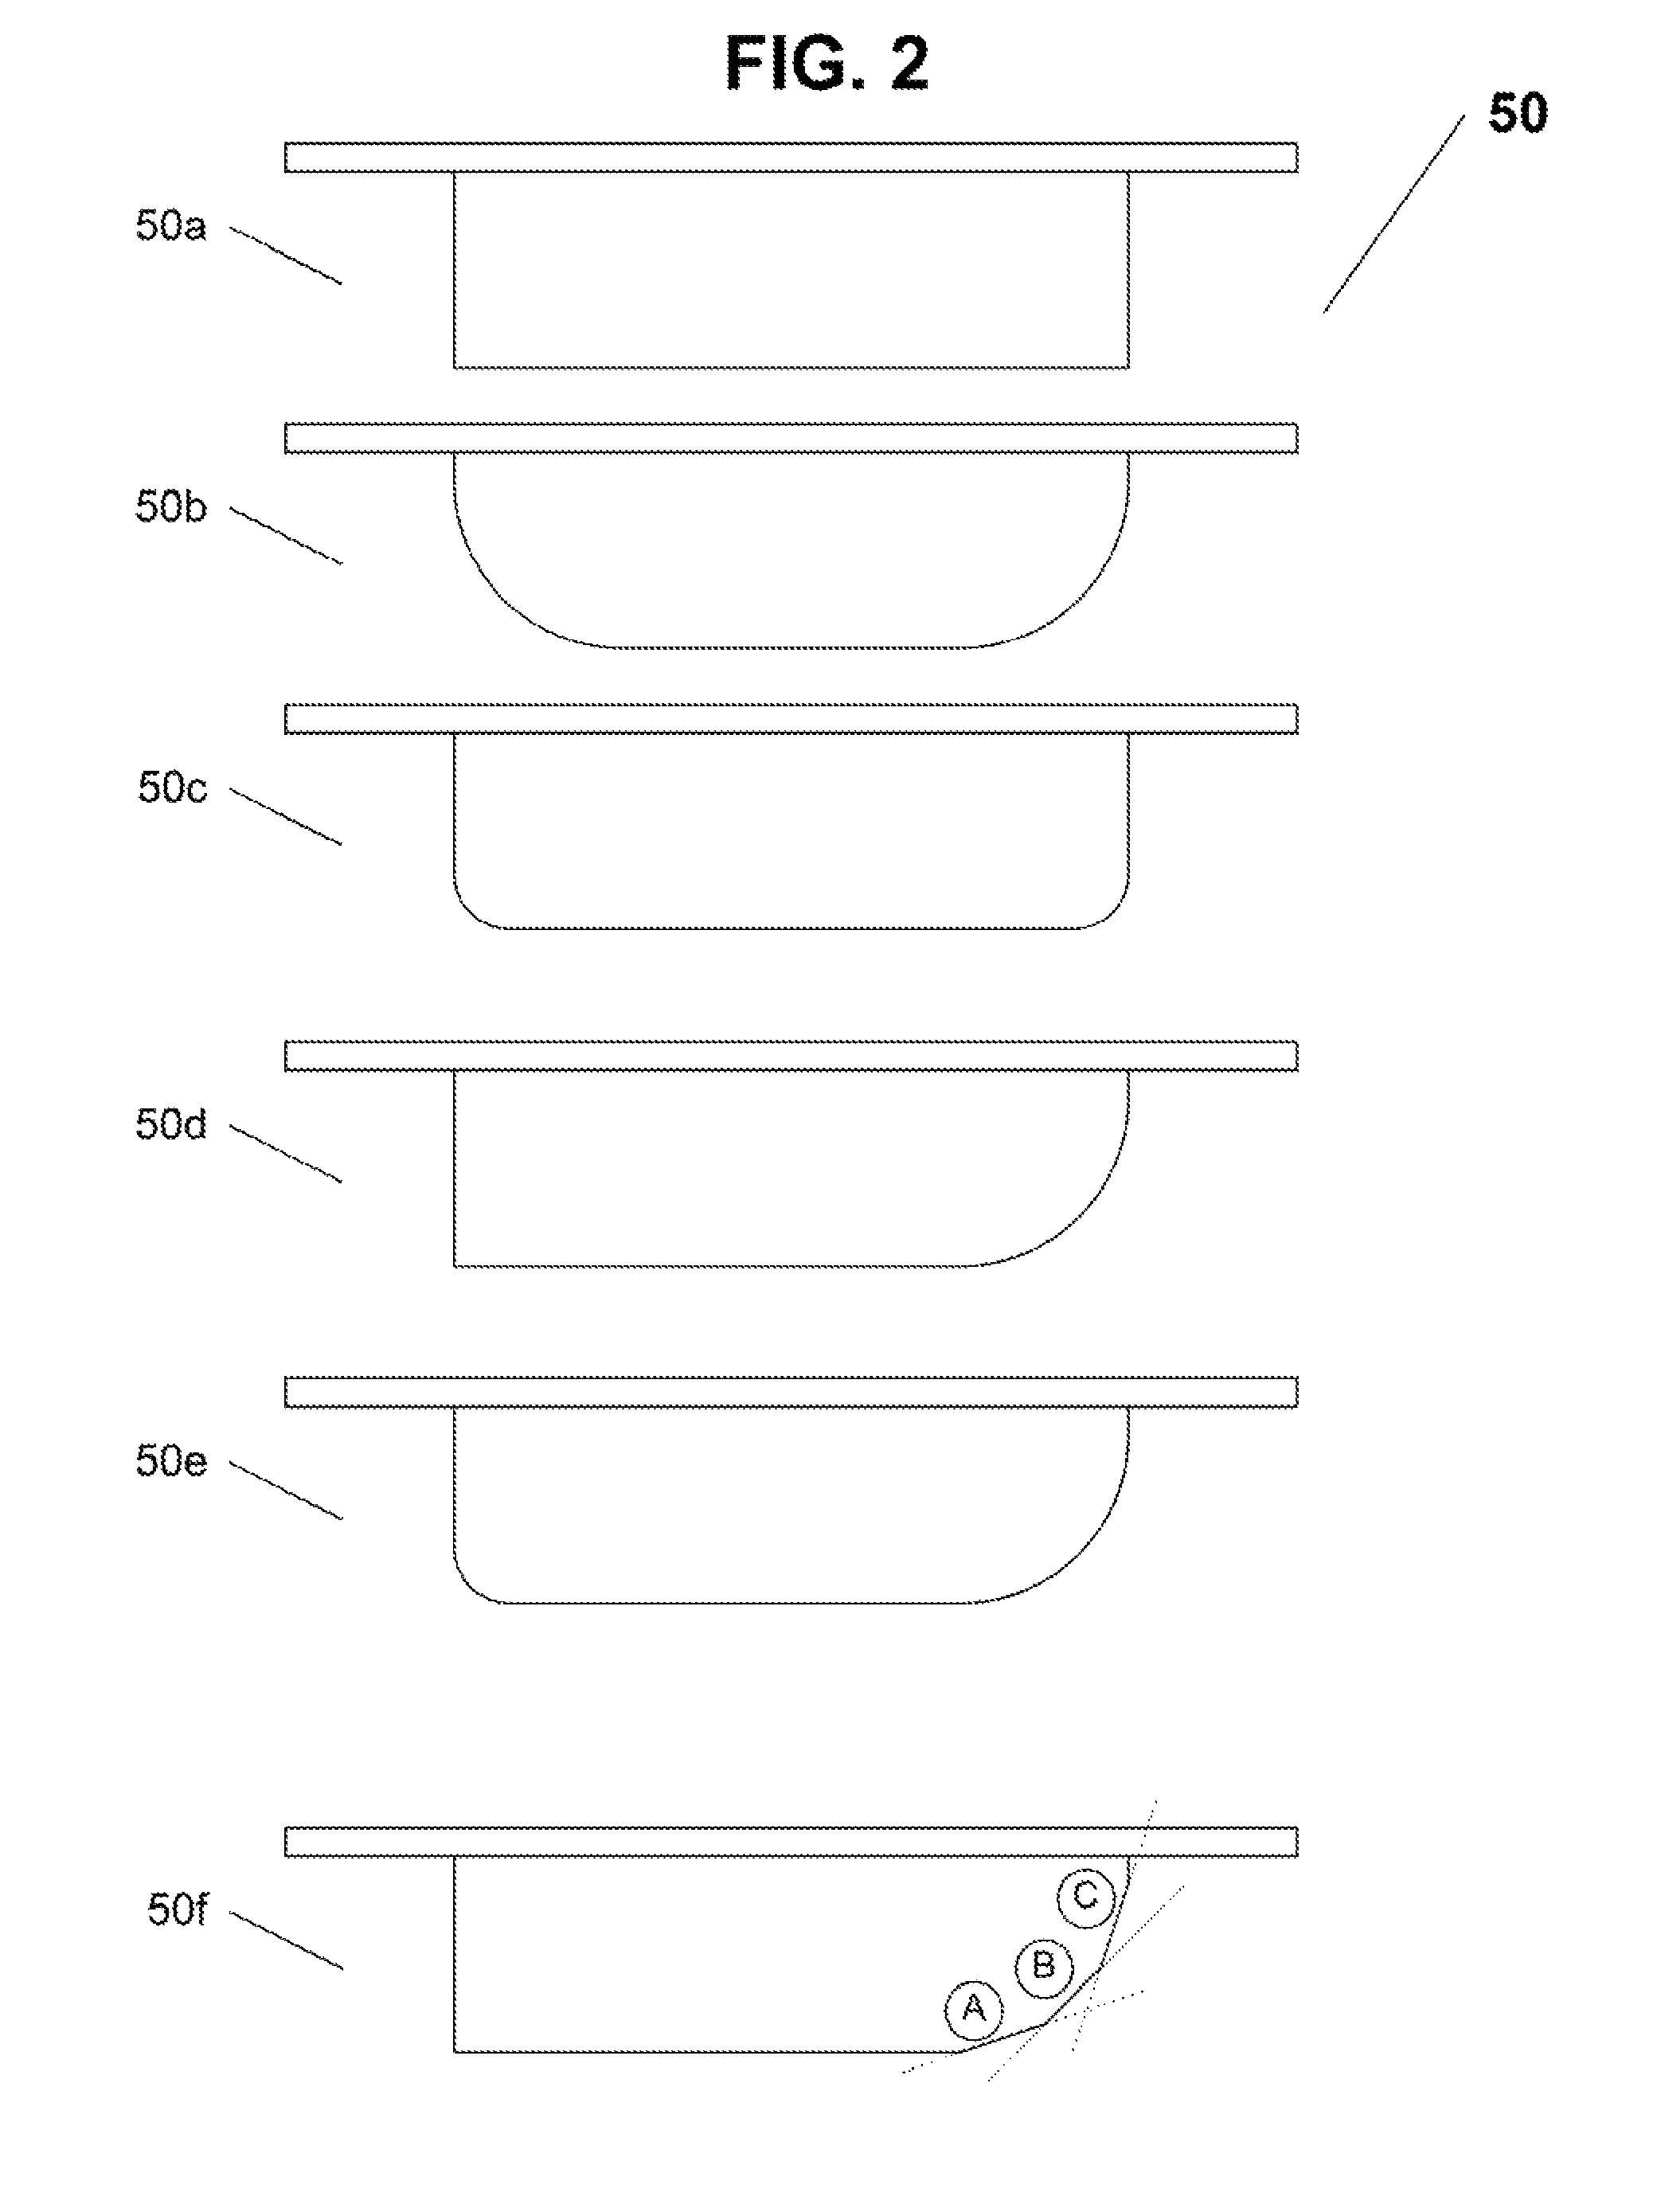 Configurable foot-operable electronic control interface apparatus and method